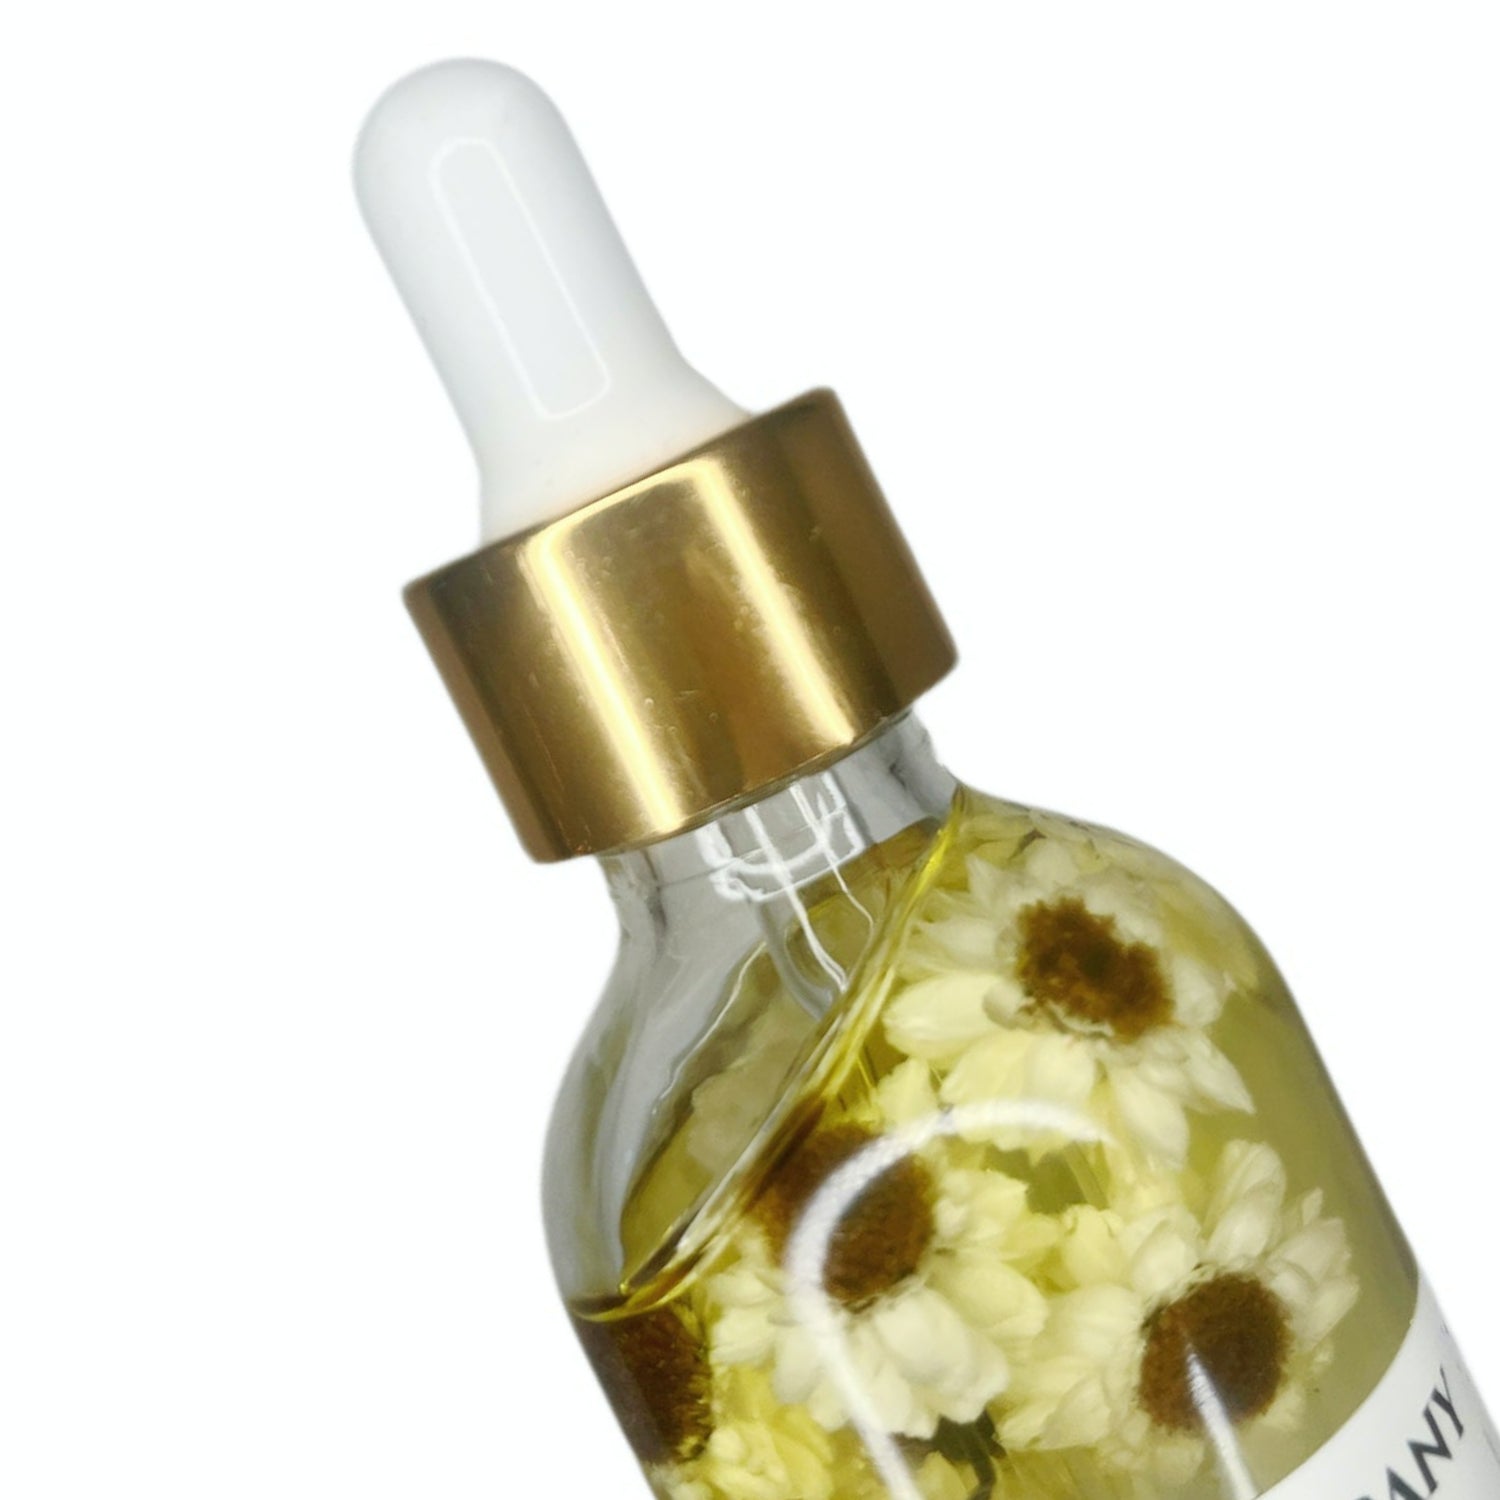 Floral Infused Body Oils